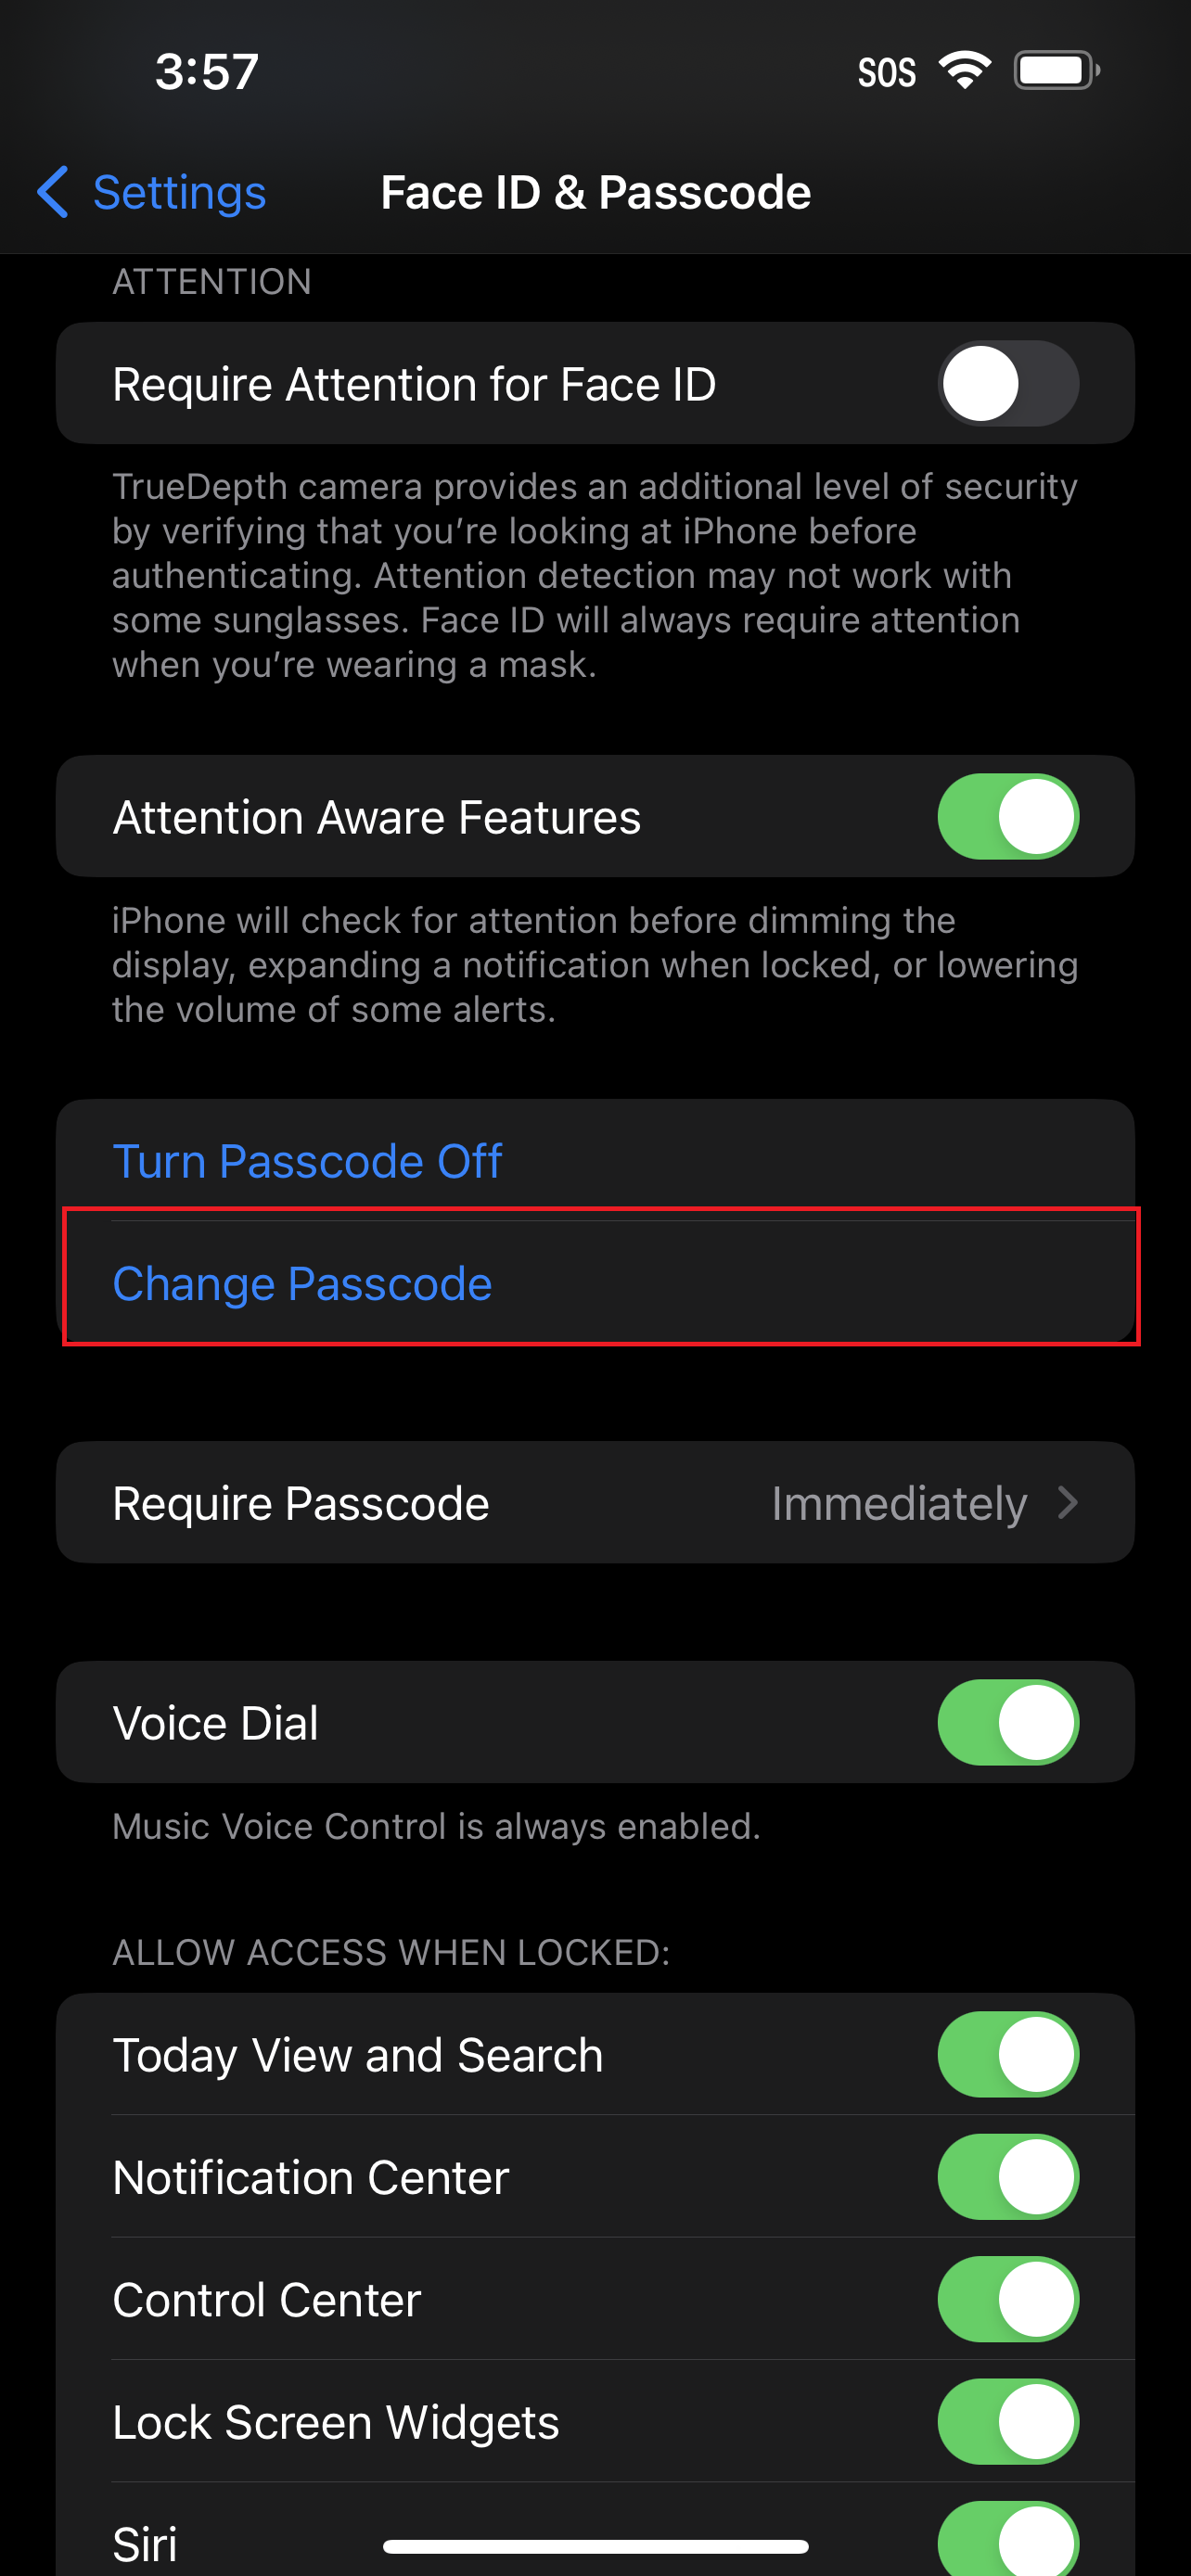 How to change password on iPhone